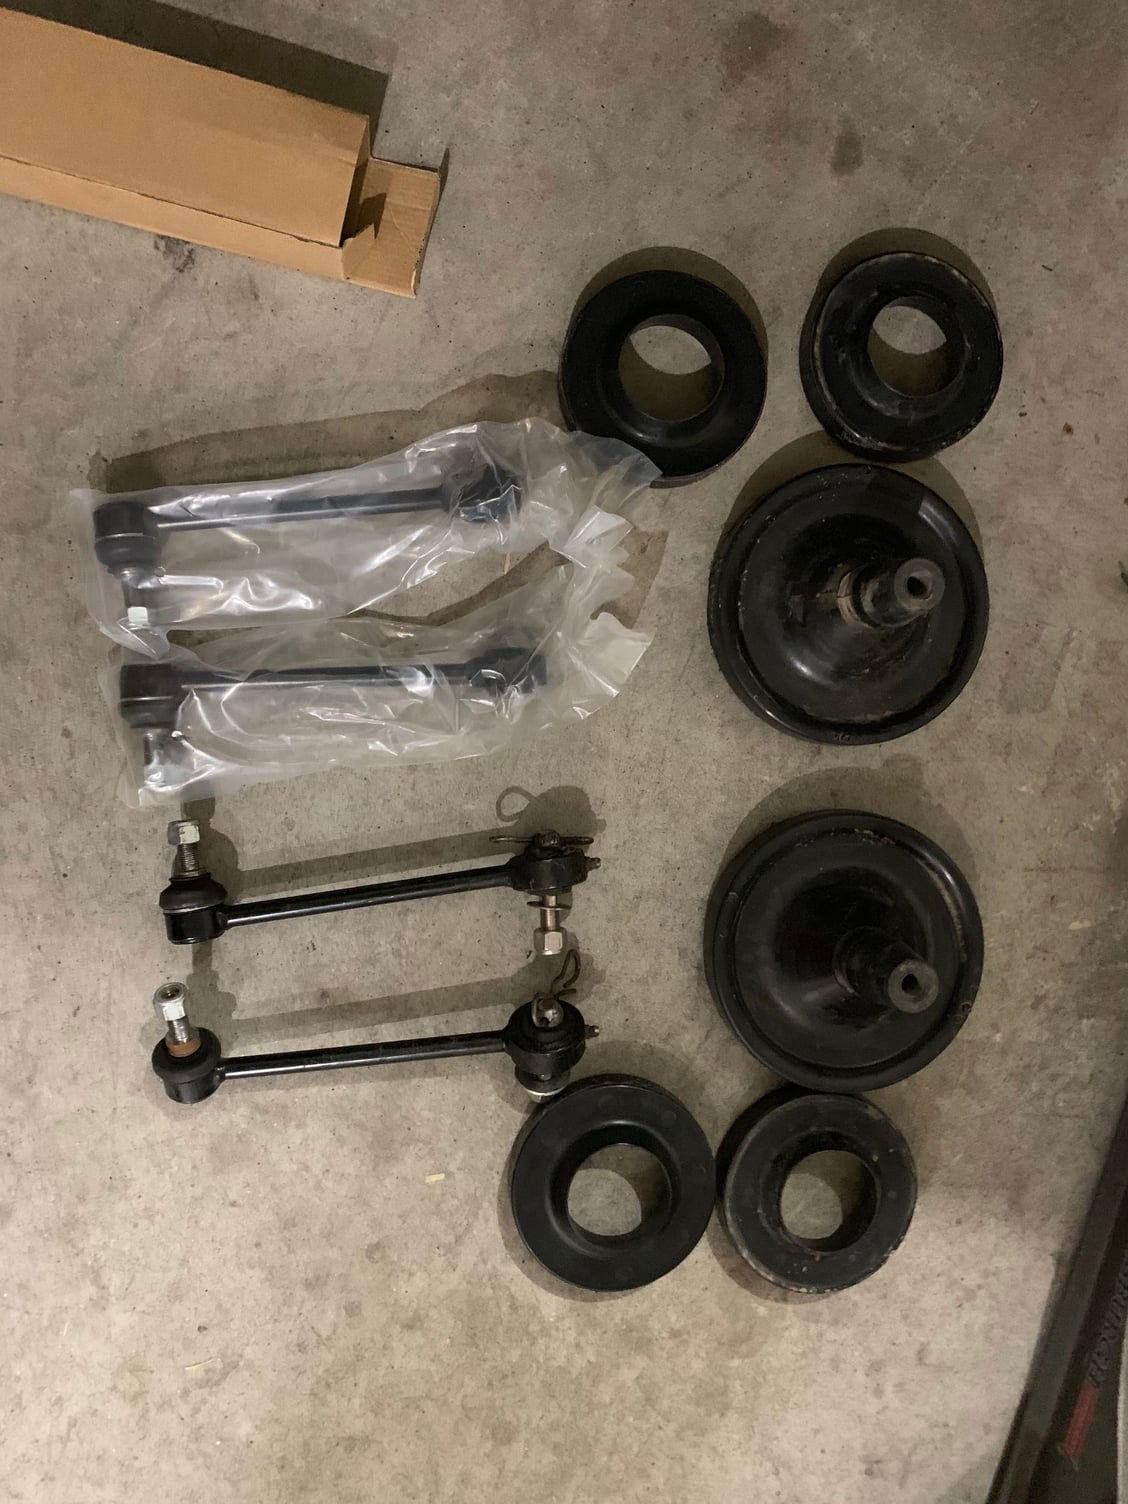 Steering/Suspension - For sale: Teraflex Leveling kit - Used - 2007 to 2018 Jeep Wrangler - San Diego, CA 92154, United States